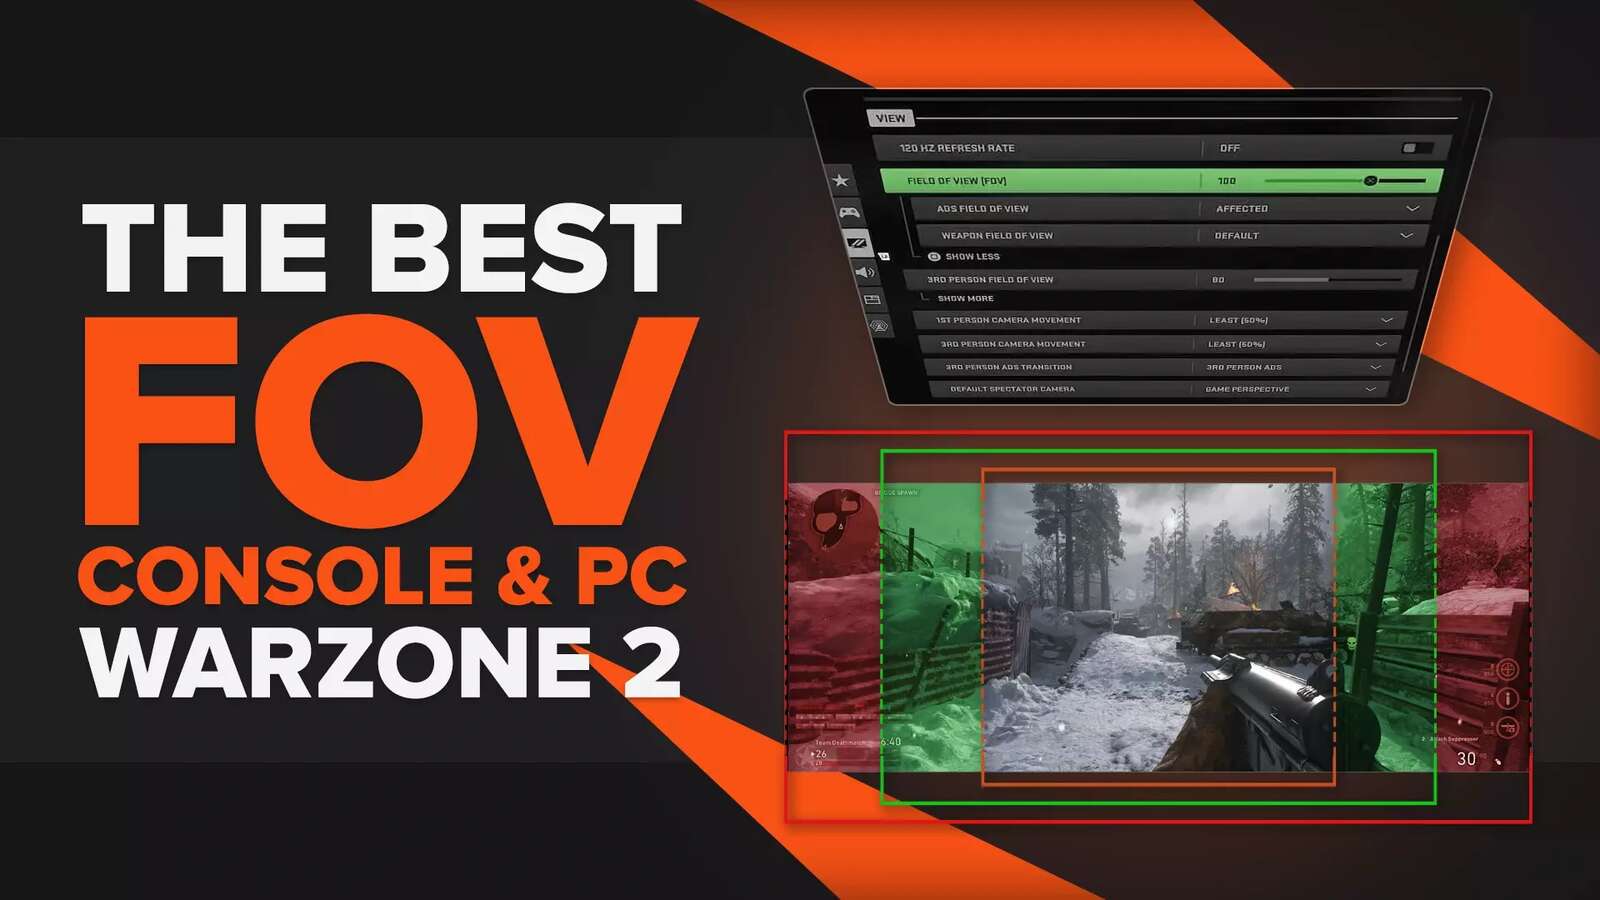 What Is The Best Warzone FOV For Console & PC